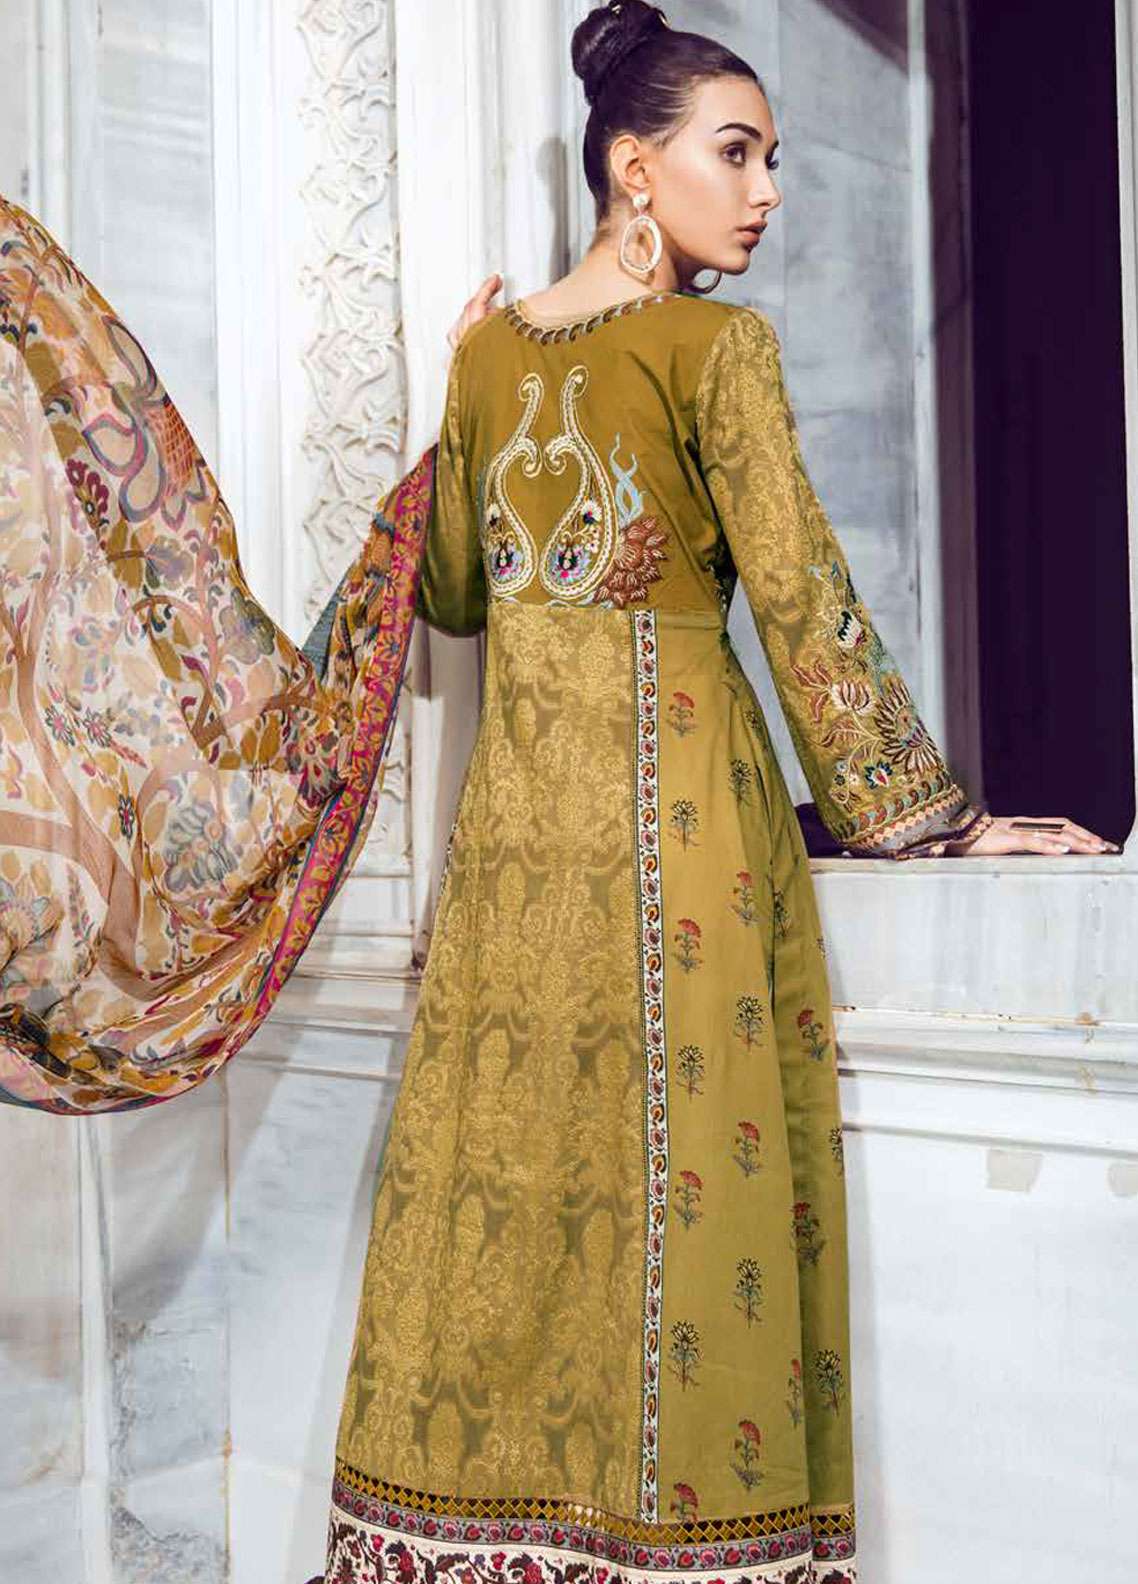 Tena Durrani Embroidered Lawn Unstitched 3 Piece Suit 08 - Liela Spring / Summer Collection